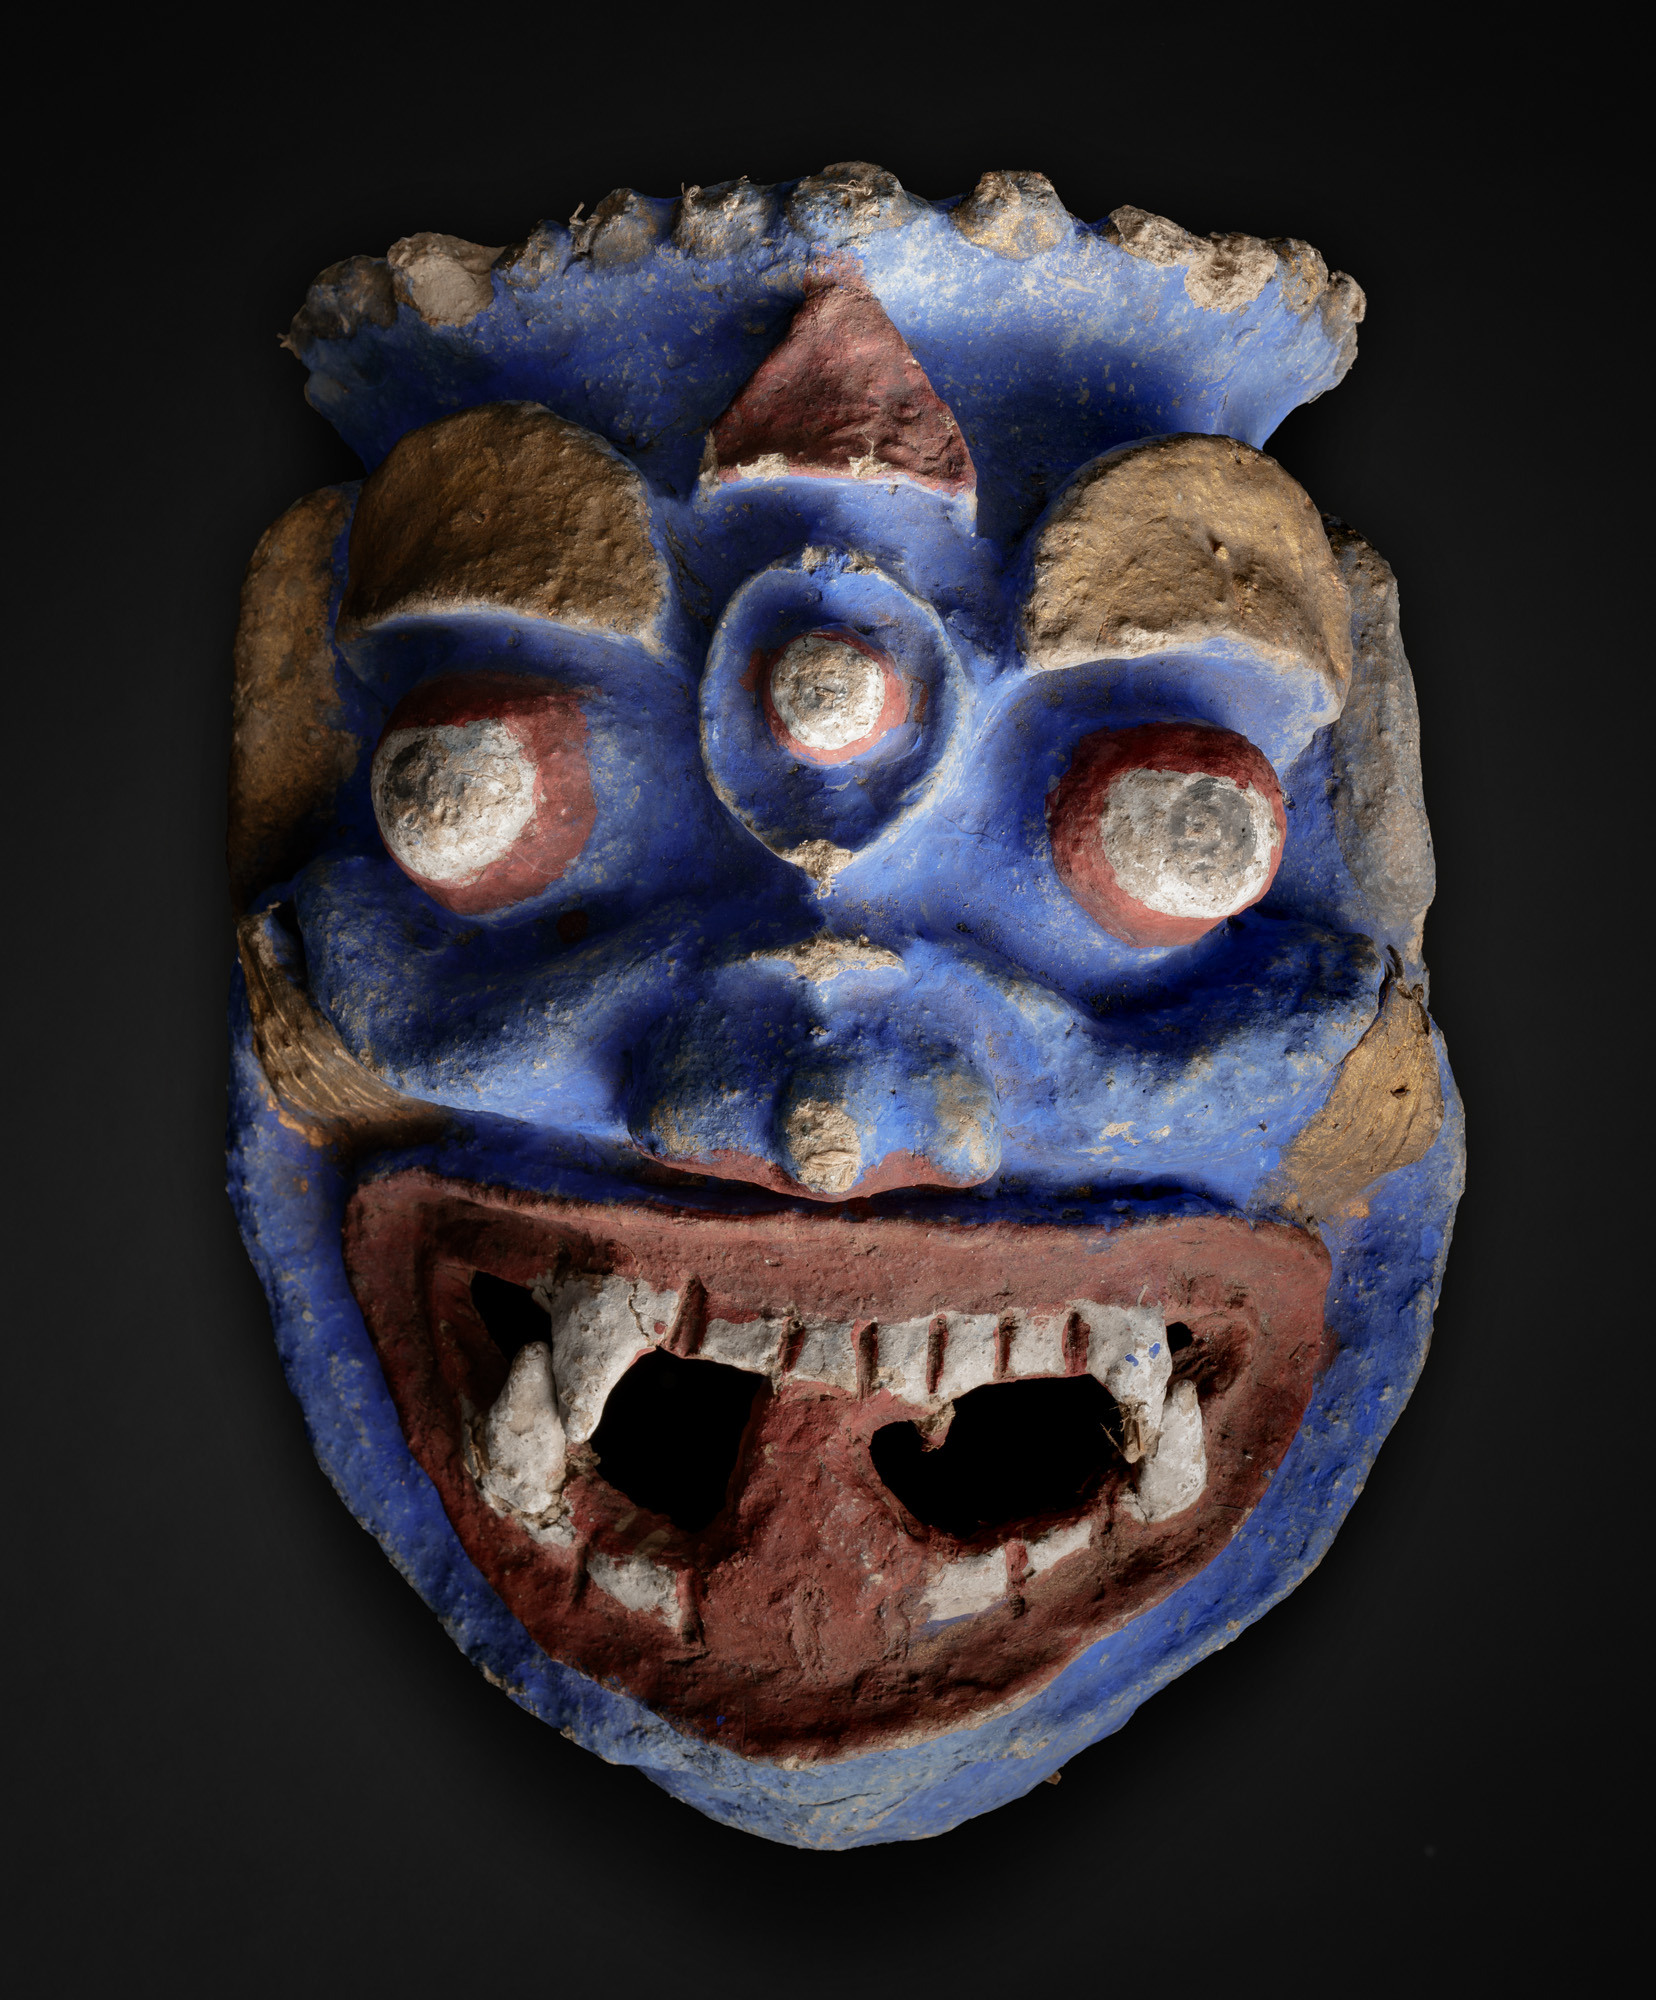 "Devil mask" from the Himalayas